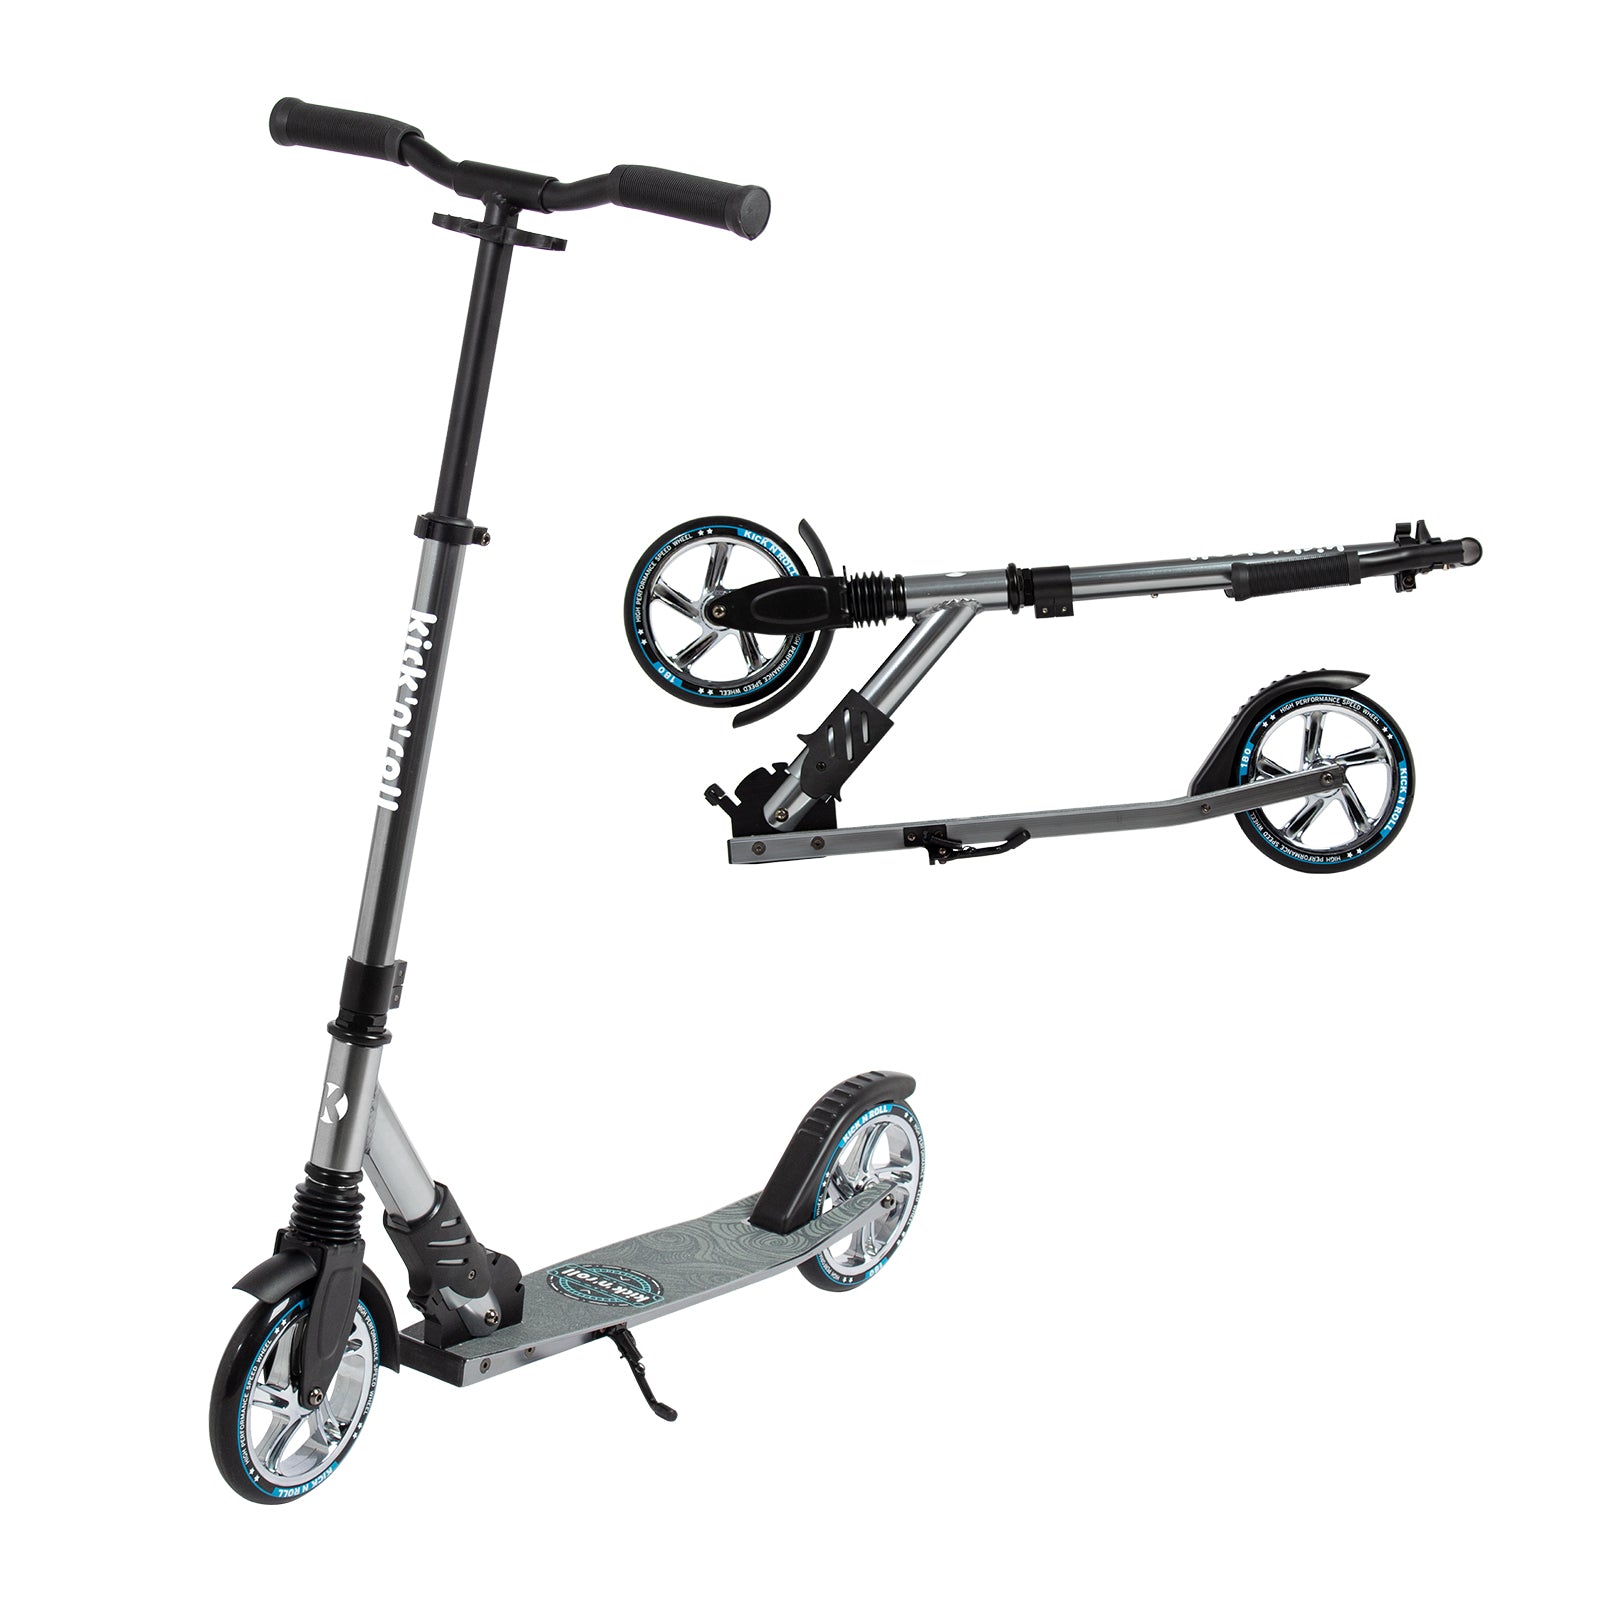 Foldable-Scooter-Adjustable-Handlebar-Height-with-Kickstand-180-mm-Wheels-Stable-Aluminum-Scooter-for-Adults-and-Teenagers-up-to-100-kg-Gray